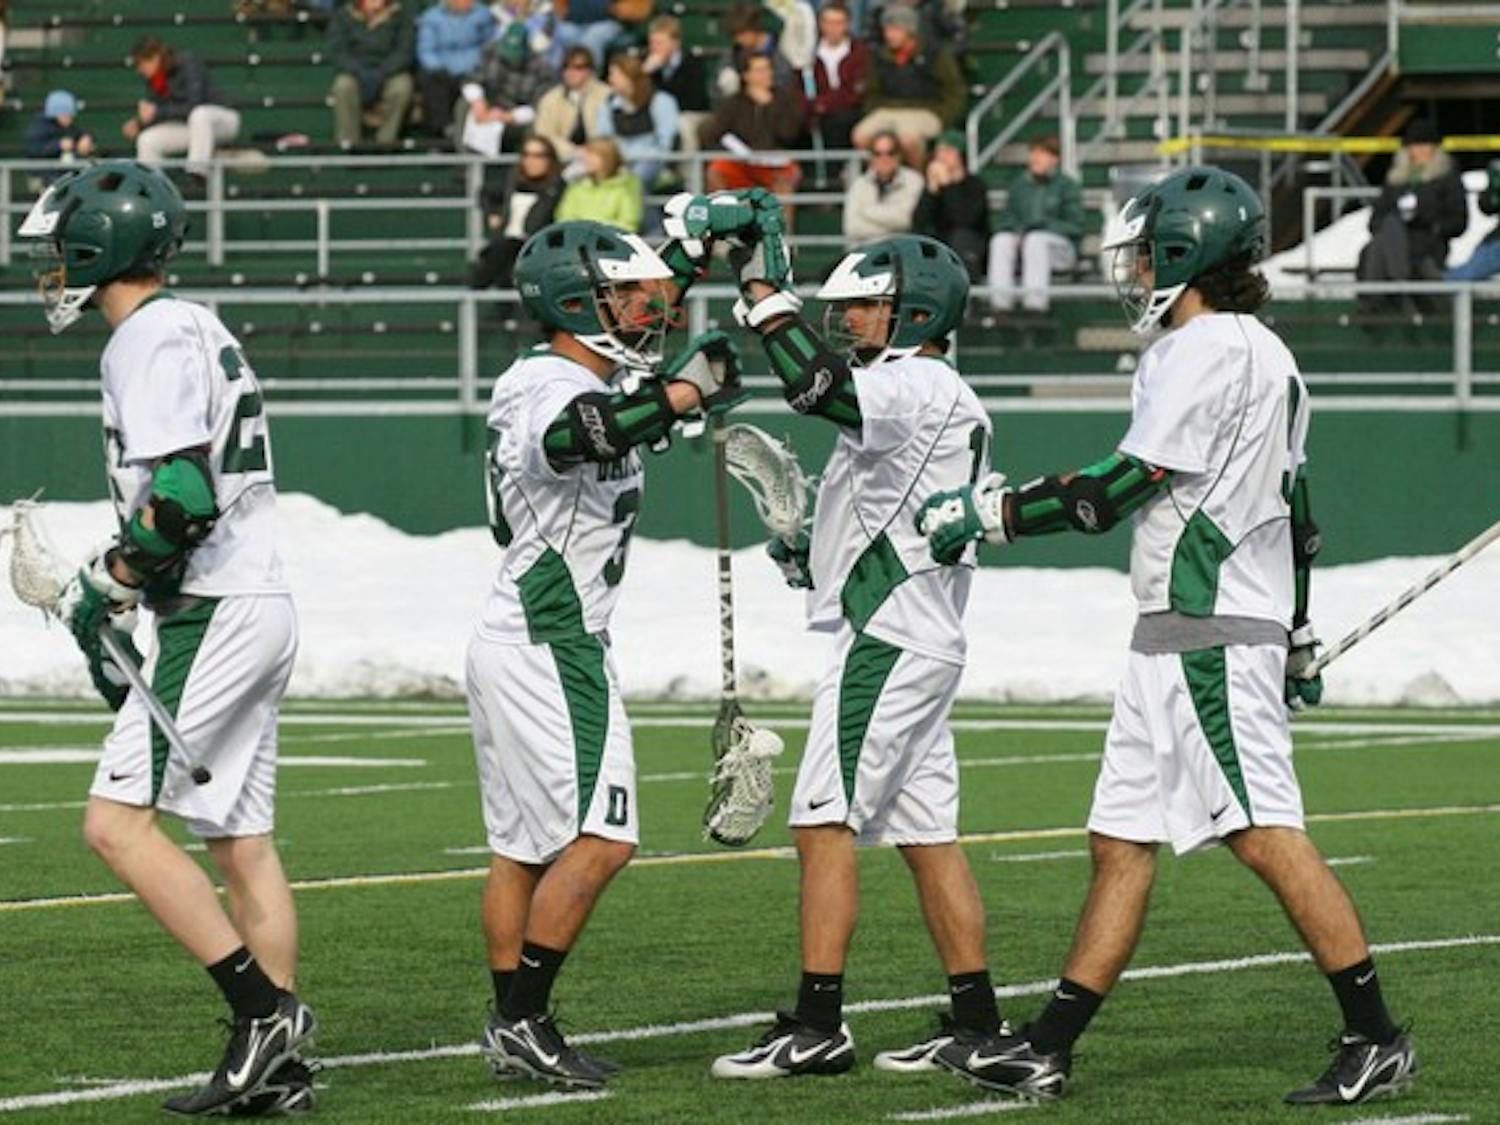 Dartmouth beat Holy Cross for the 27th consecutive time behind multi-goal performances from seven players.